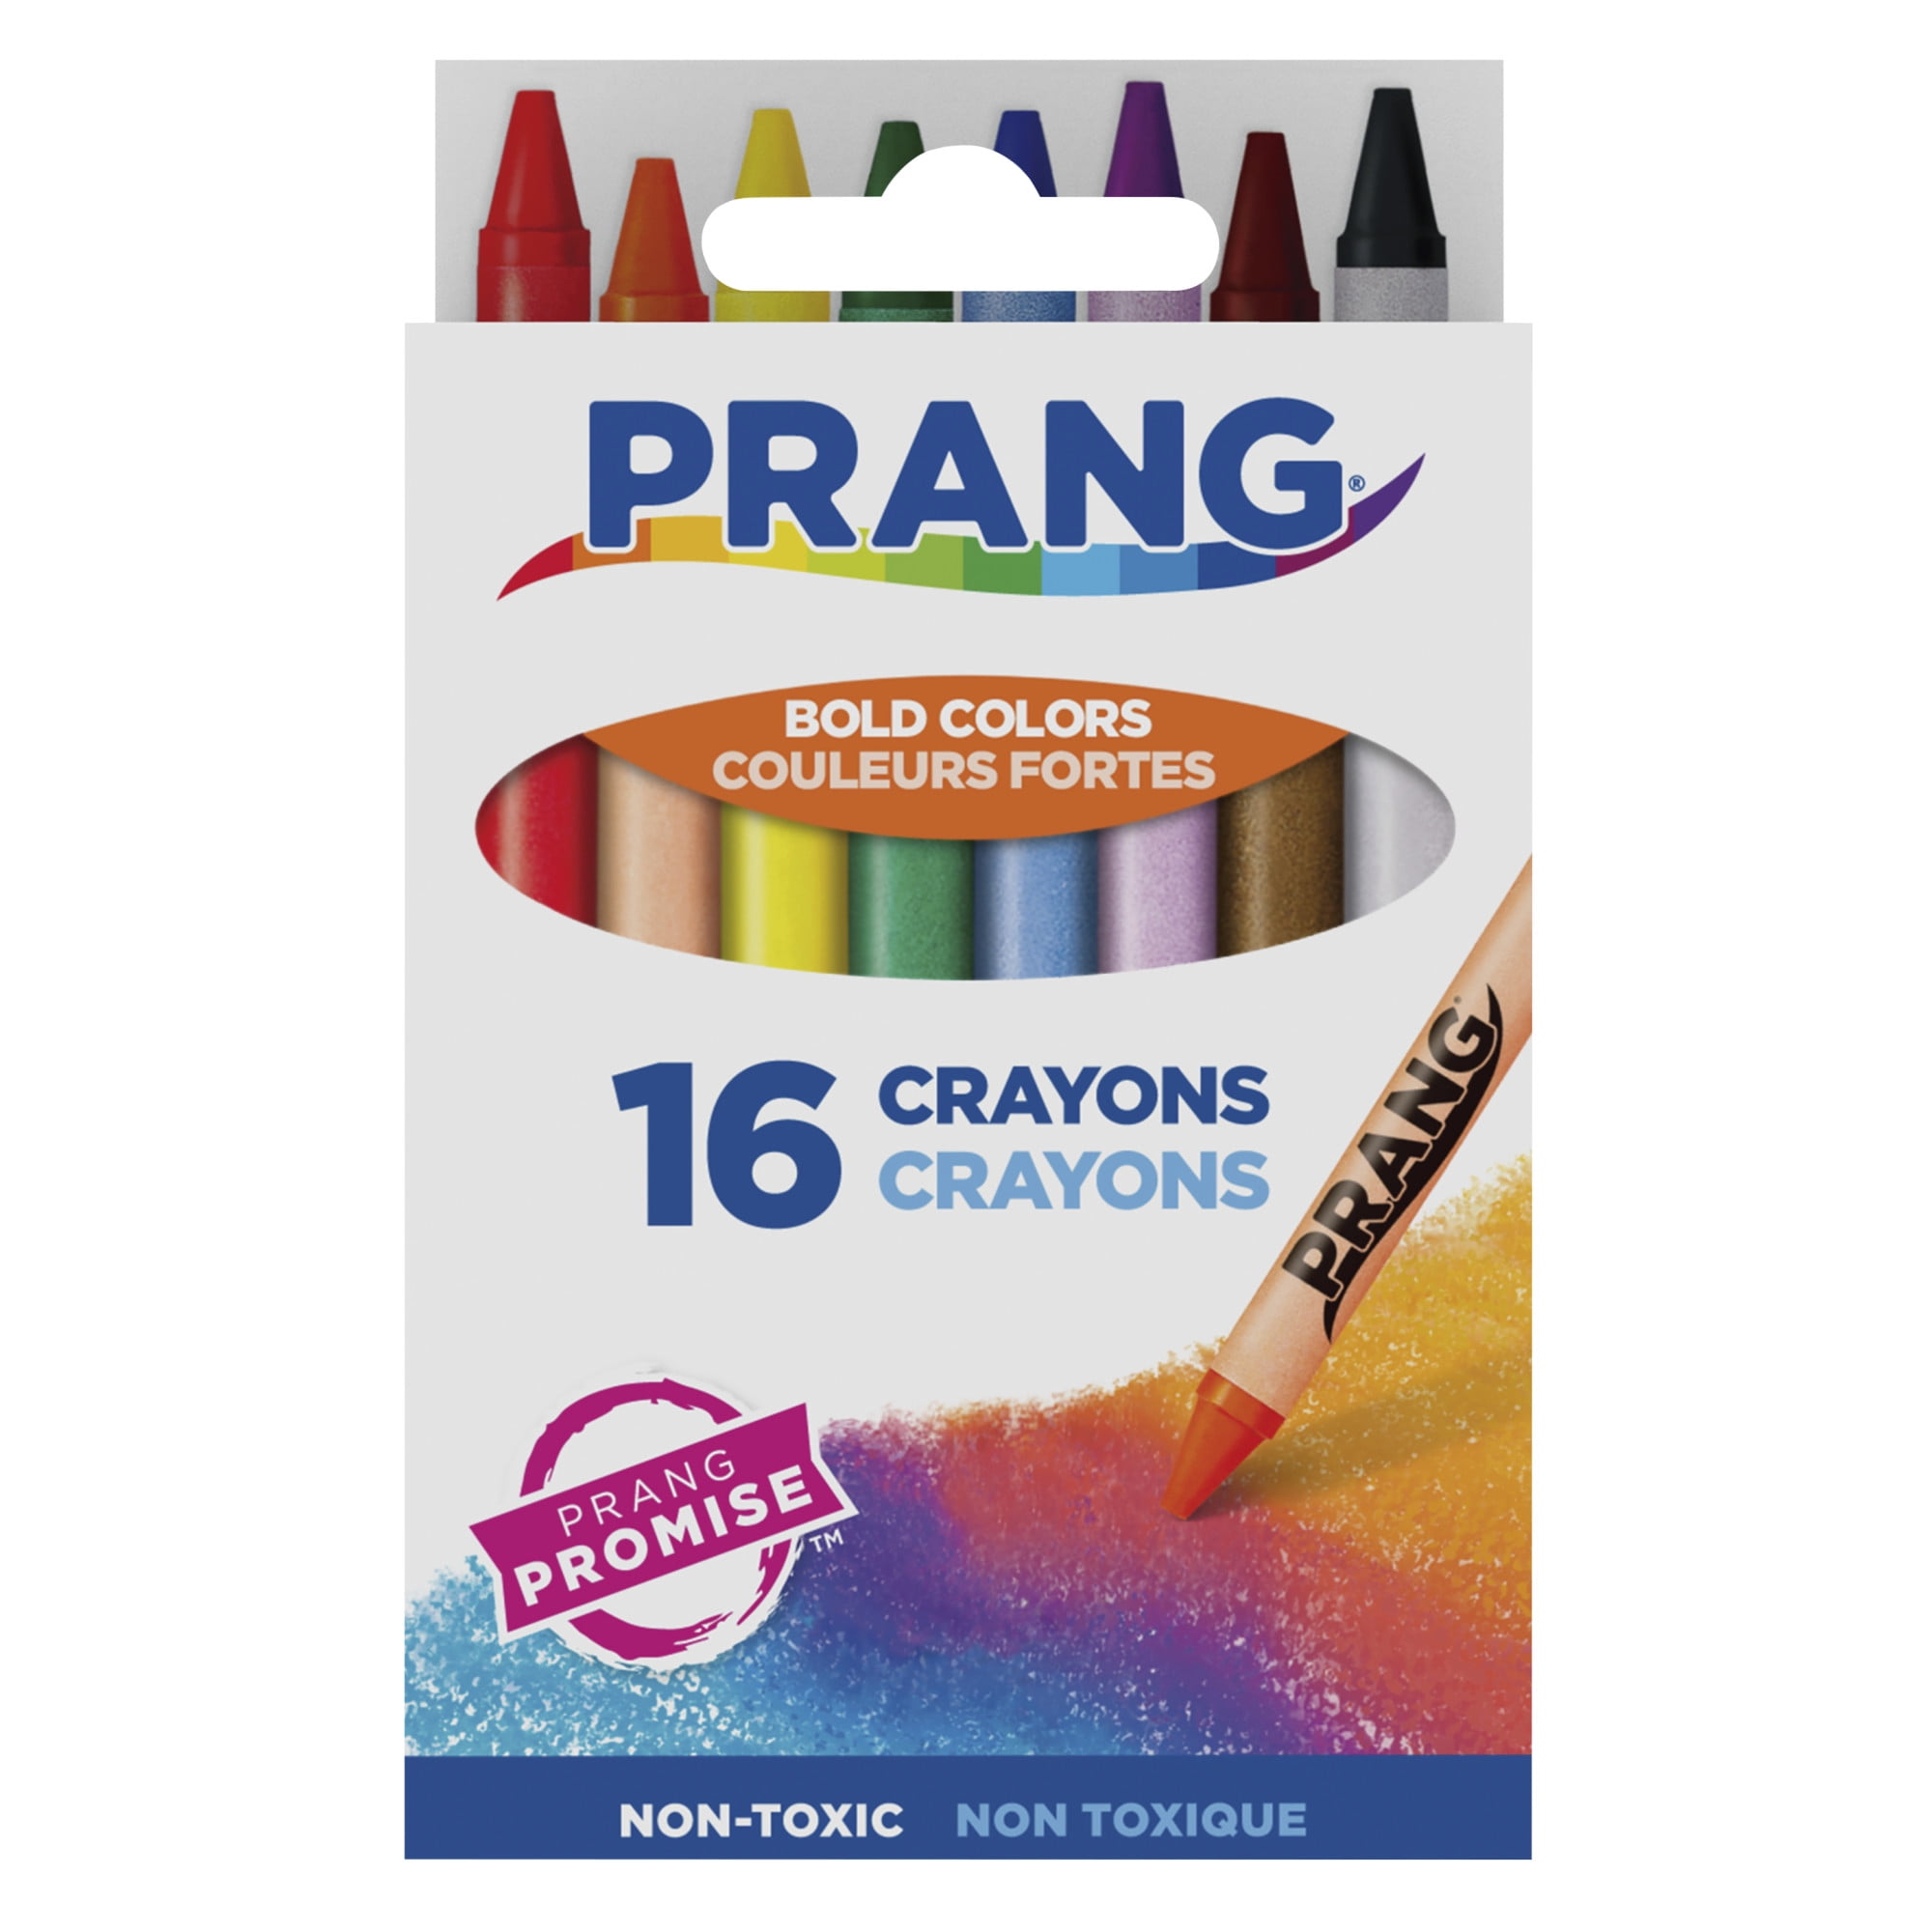 Mr. Pen- Crayons, Gel Crayons, 12 Pack, Twist Up Crayons, Non-Toxic, Silky Crayons for Coloring Book, Gel Crayons for Bible Journaling, Artist Crayons